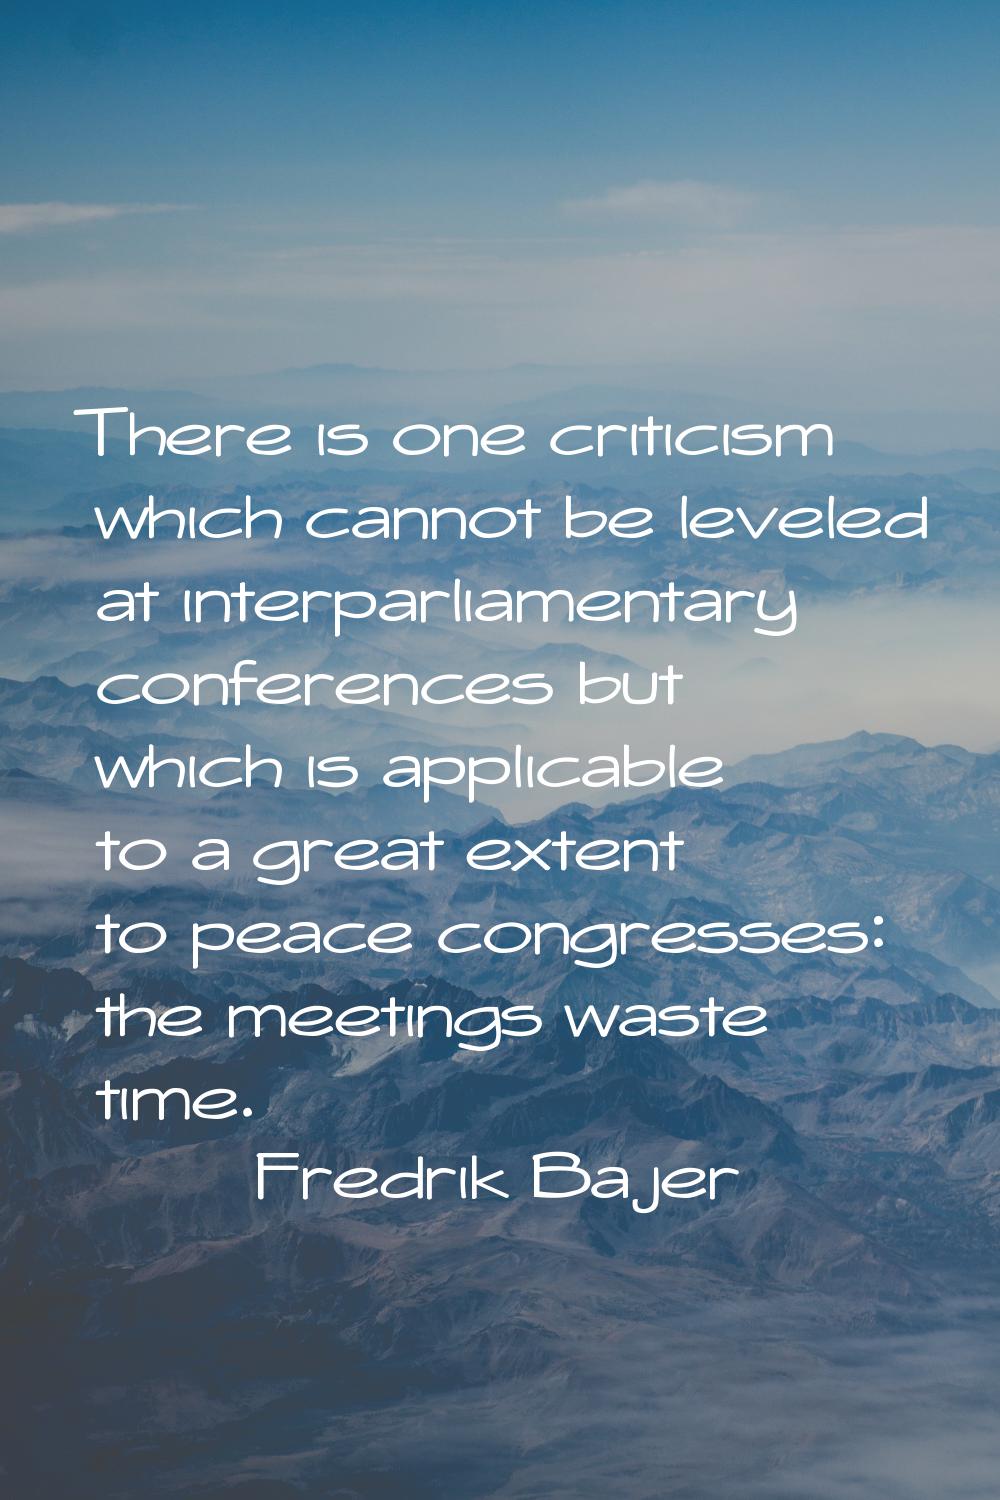 There is one criticism which cannot be leveled at interparliamentary conferences but which is appli